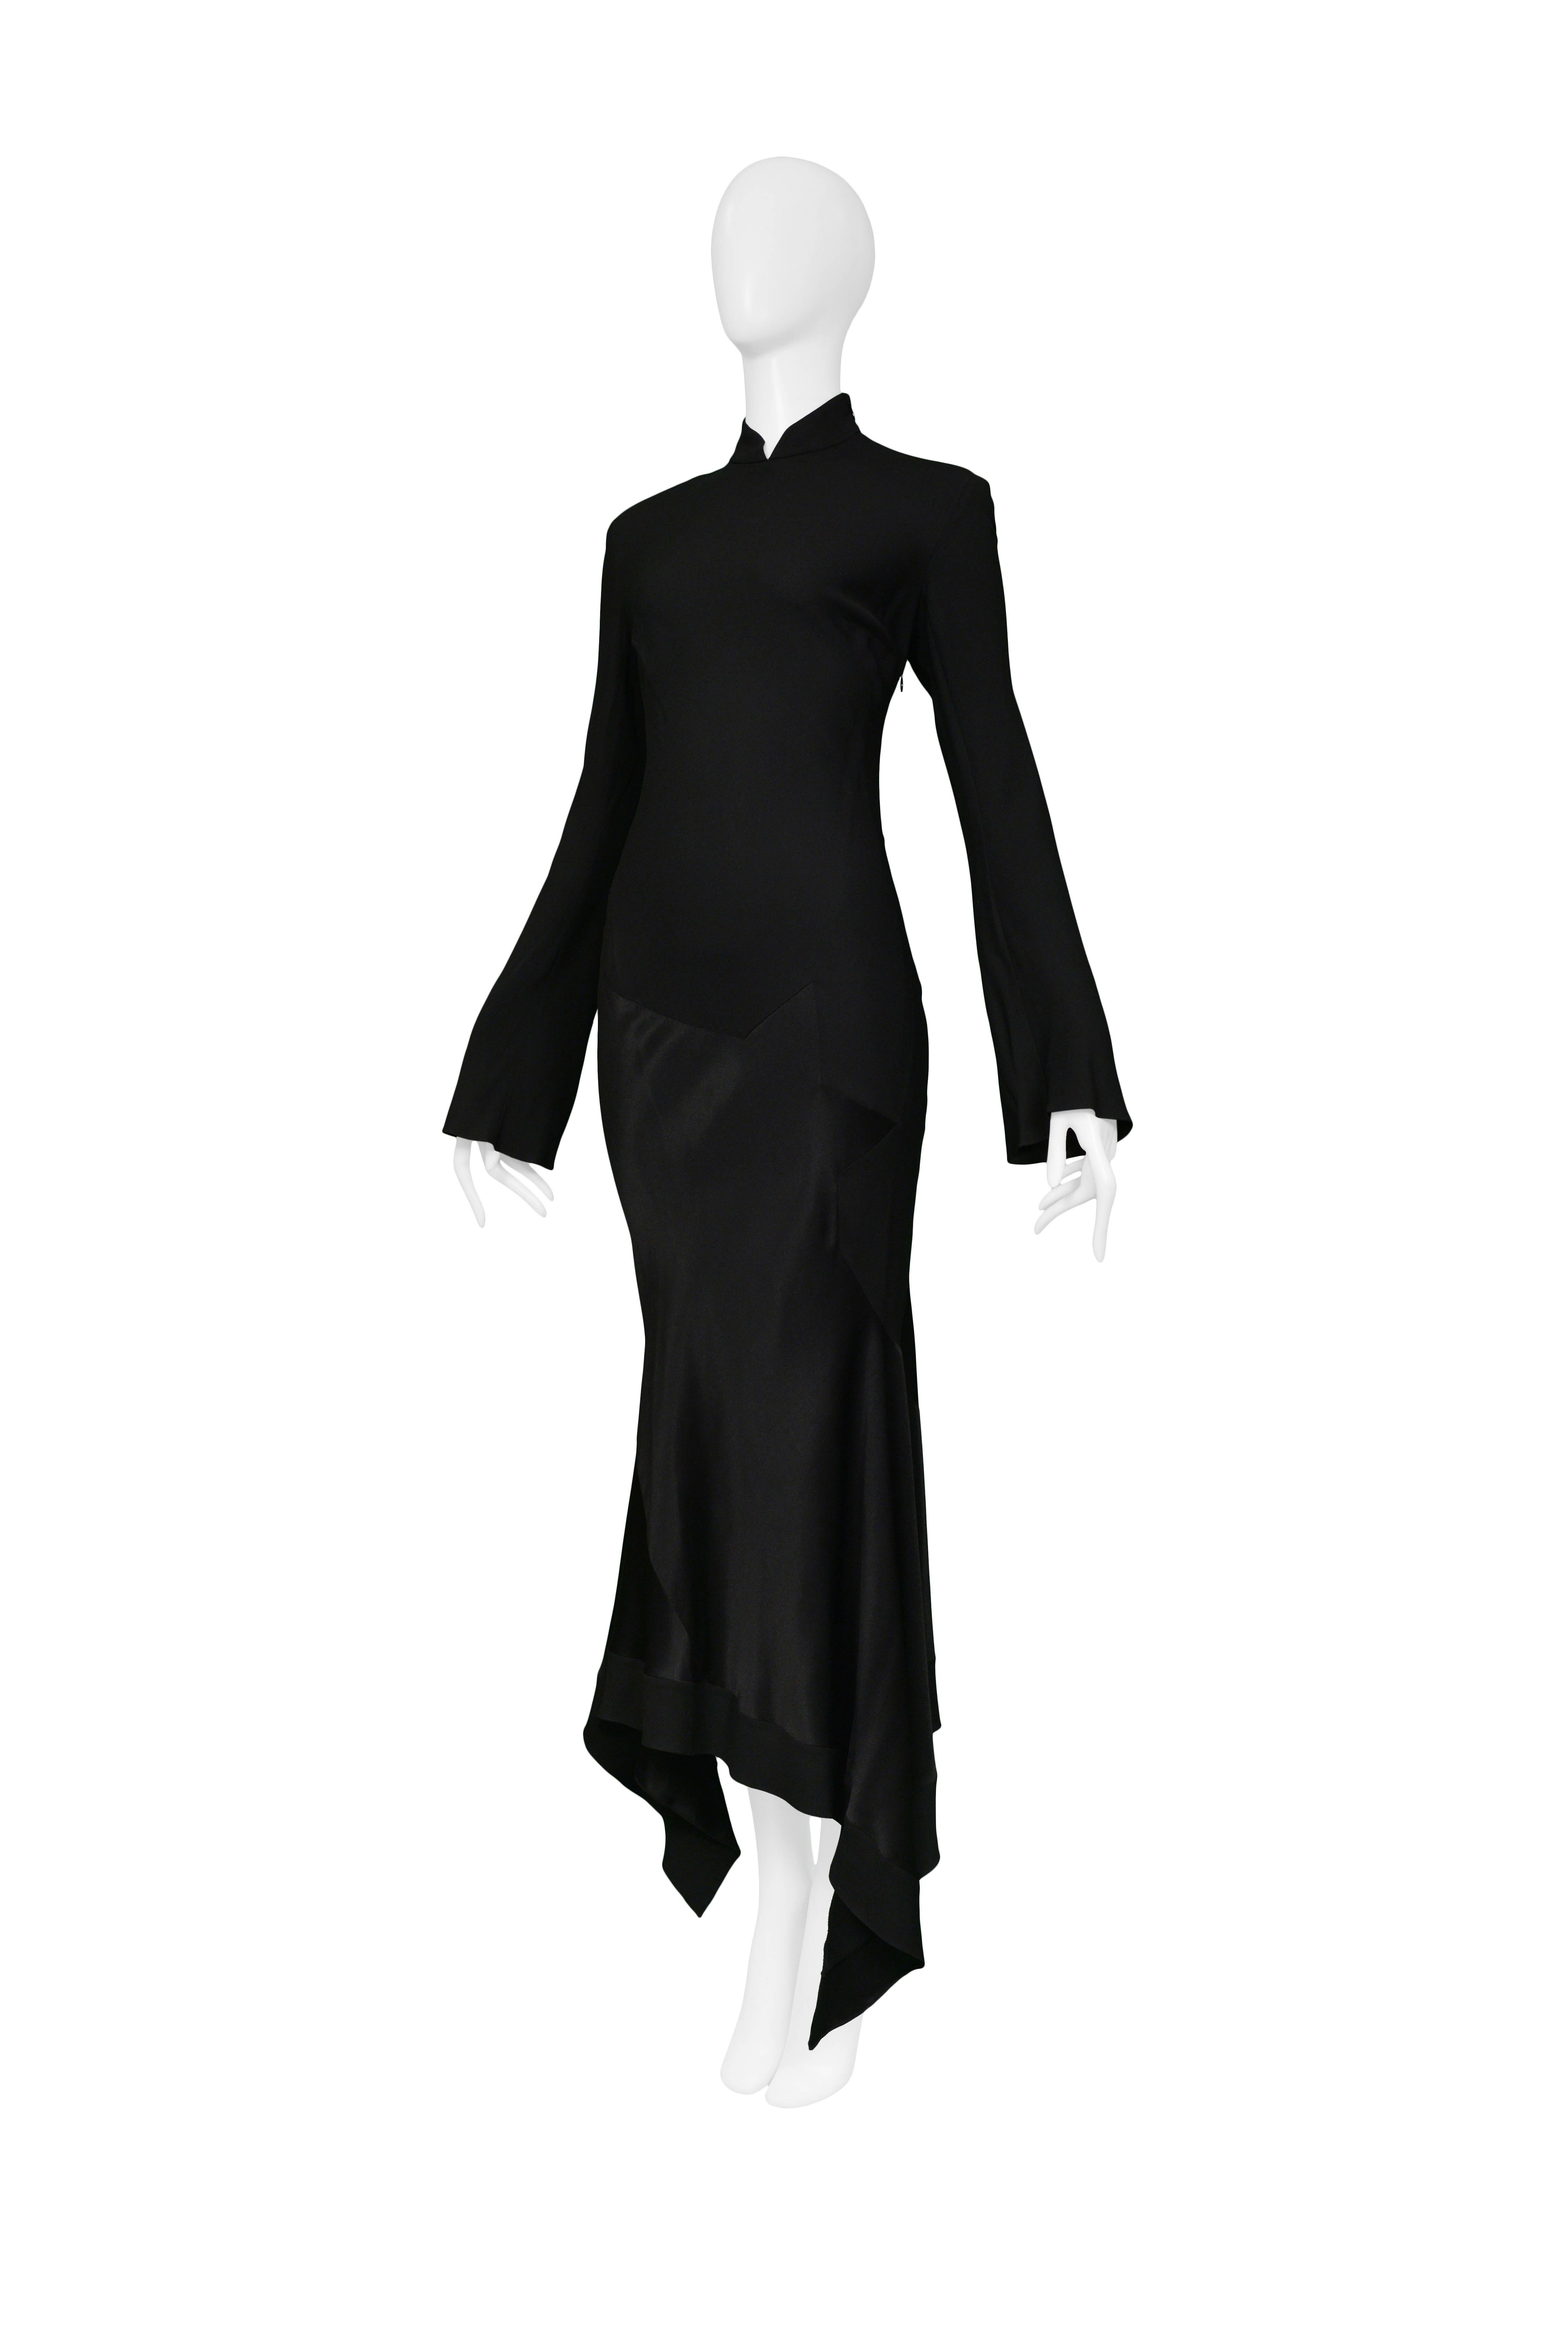 JOHN GALLIANO

BLACK STAR PANEL GOWN 1994-95
Condition : Excellent Vintage Condition
Size : SMALL
John Galliano black crepe dress featuring a traditional mandarin collar, long flare sleeves, asymmetrical hem and silk star panel. Collection Autumn /